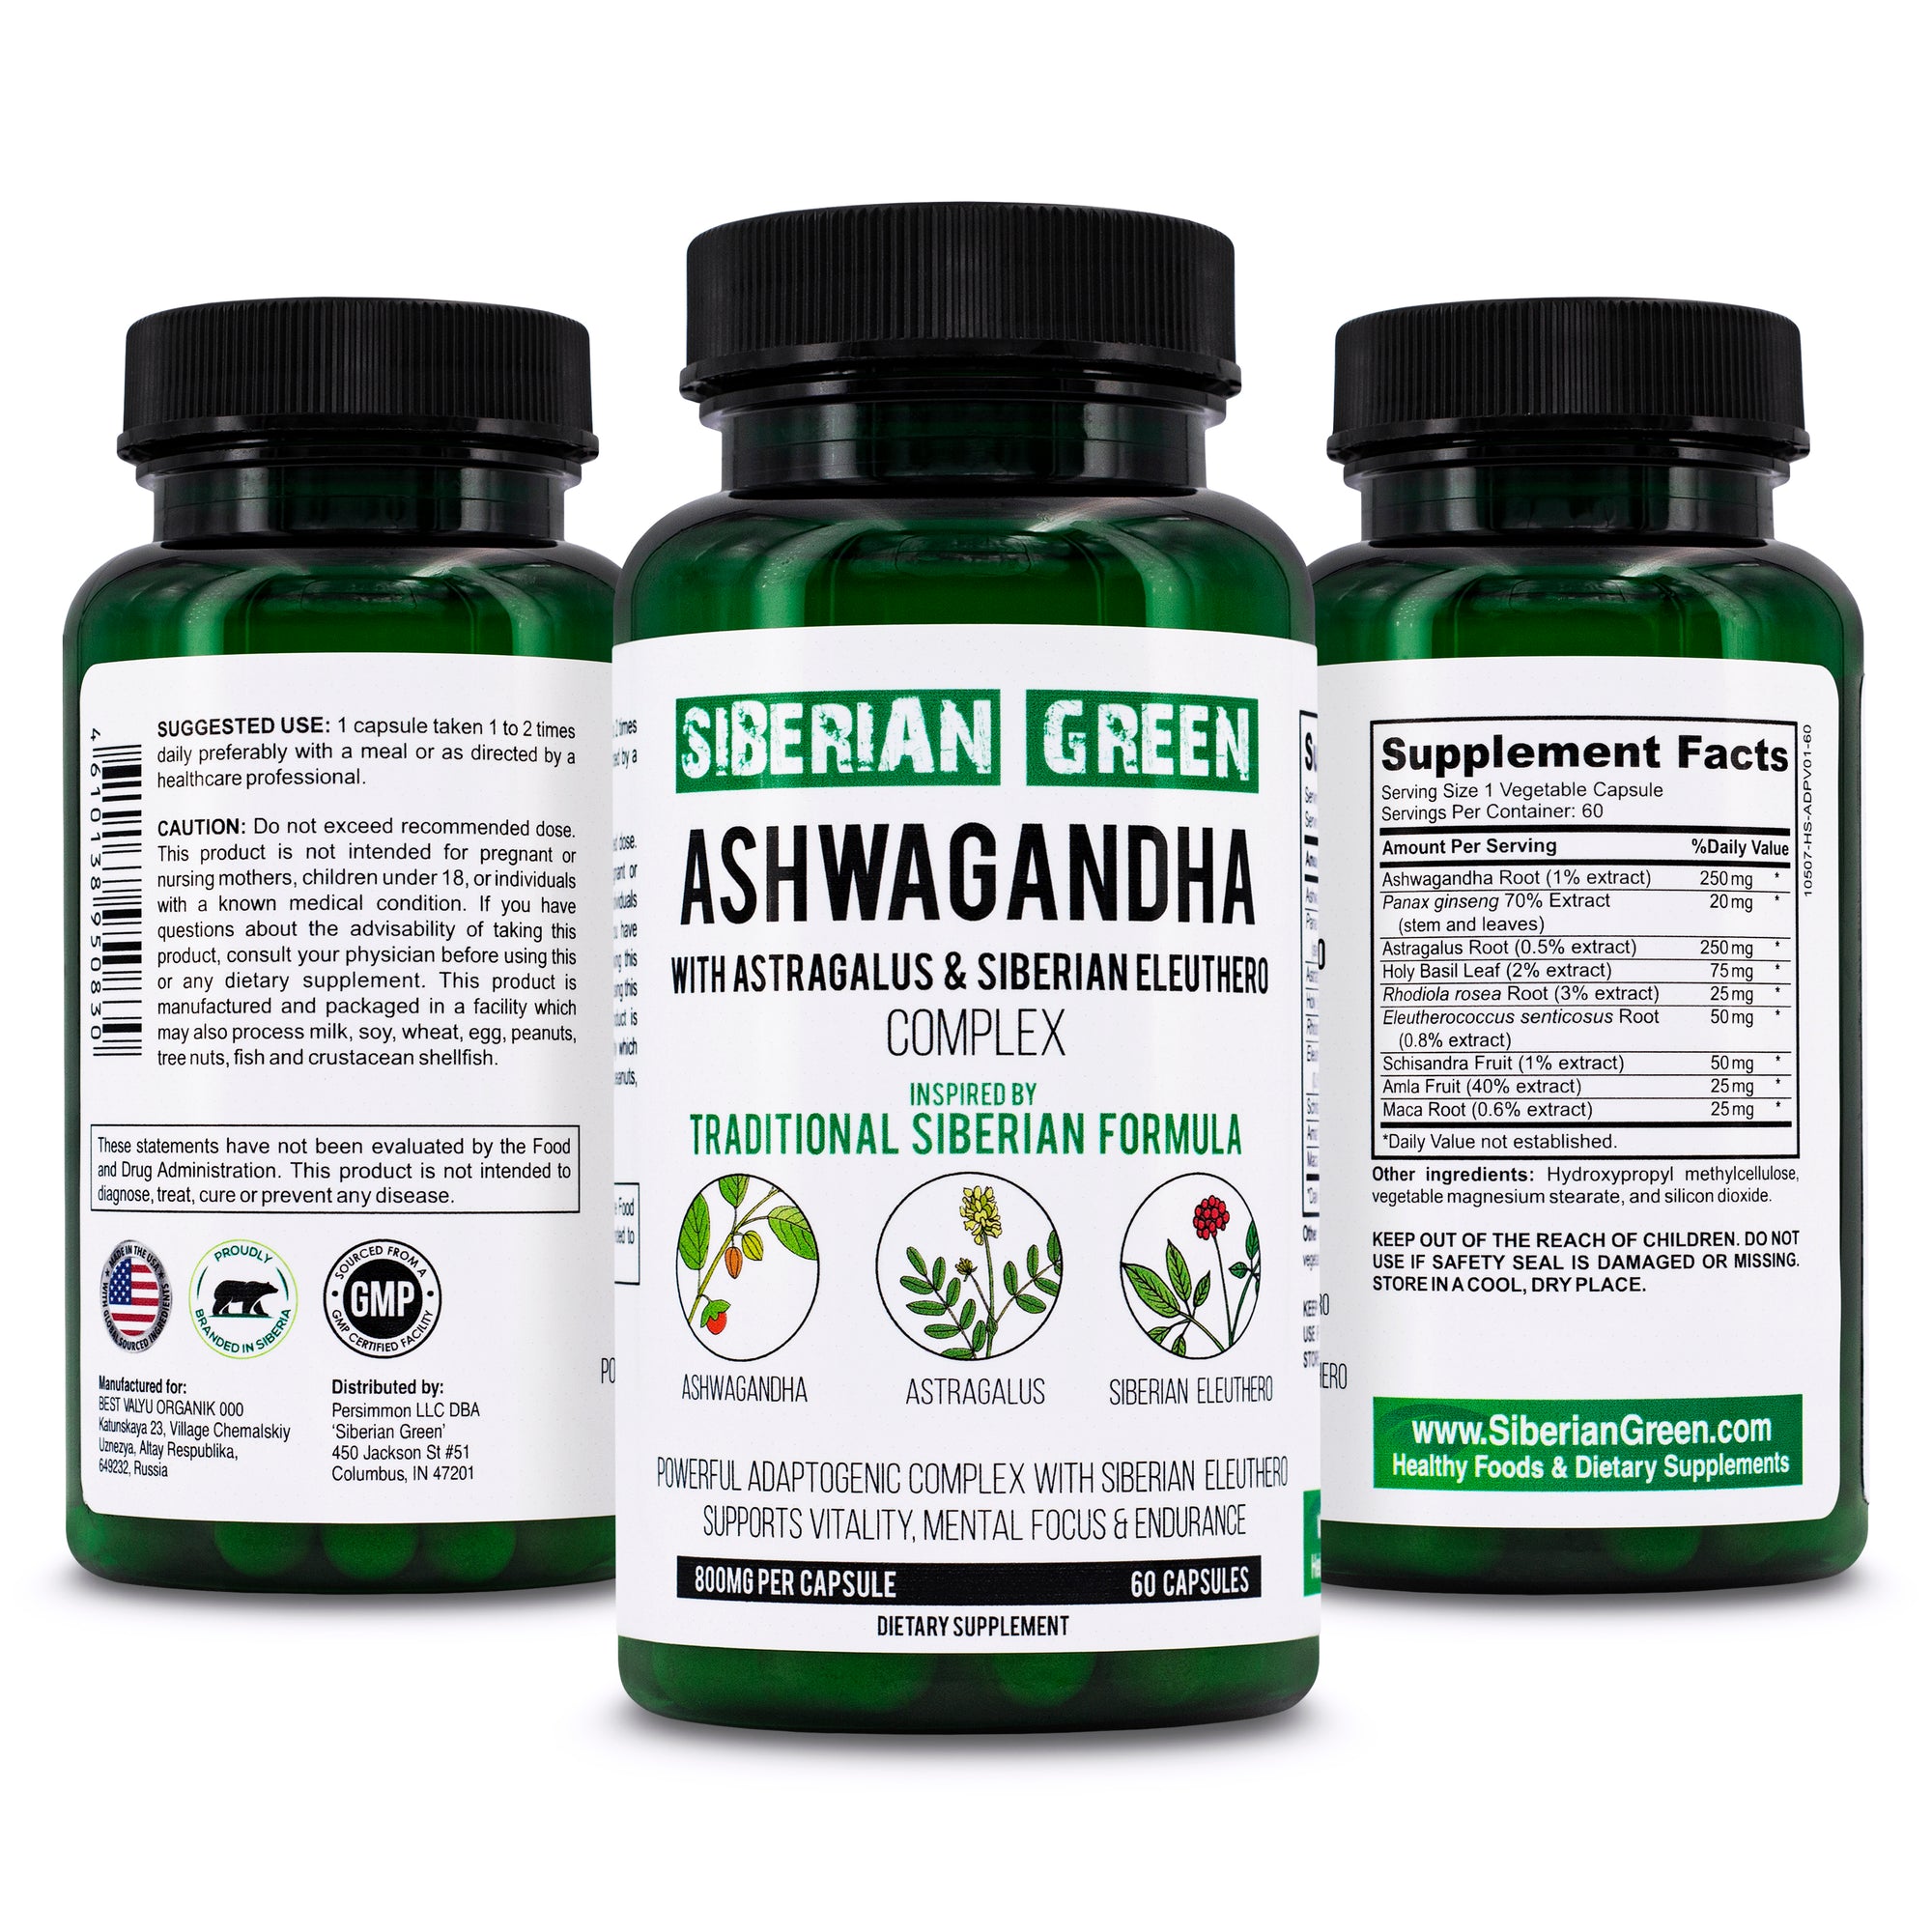 Ashwagandha with Eleuthero or Siberian Ginseng: why is it such a wonderful combination?